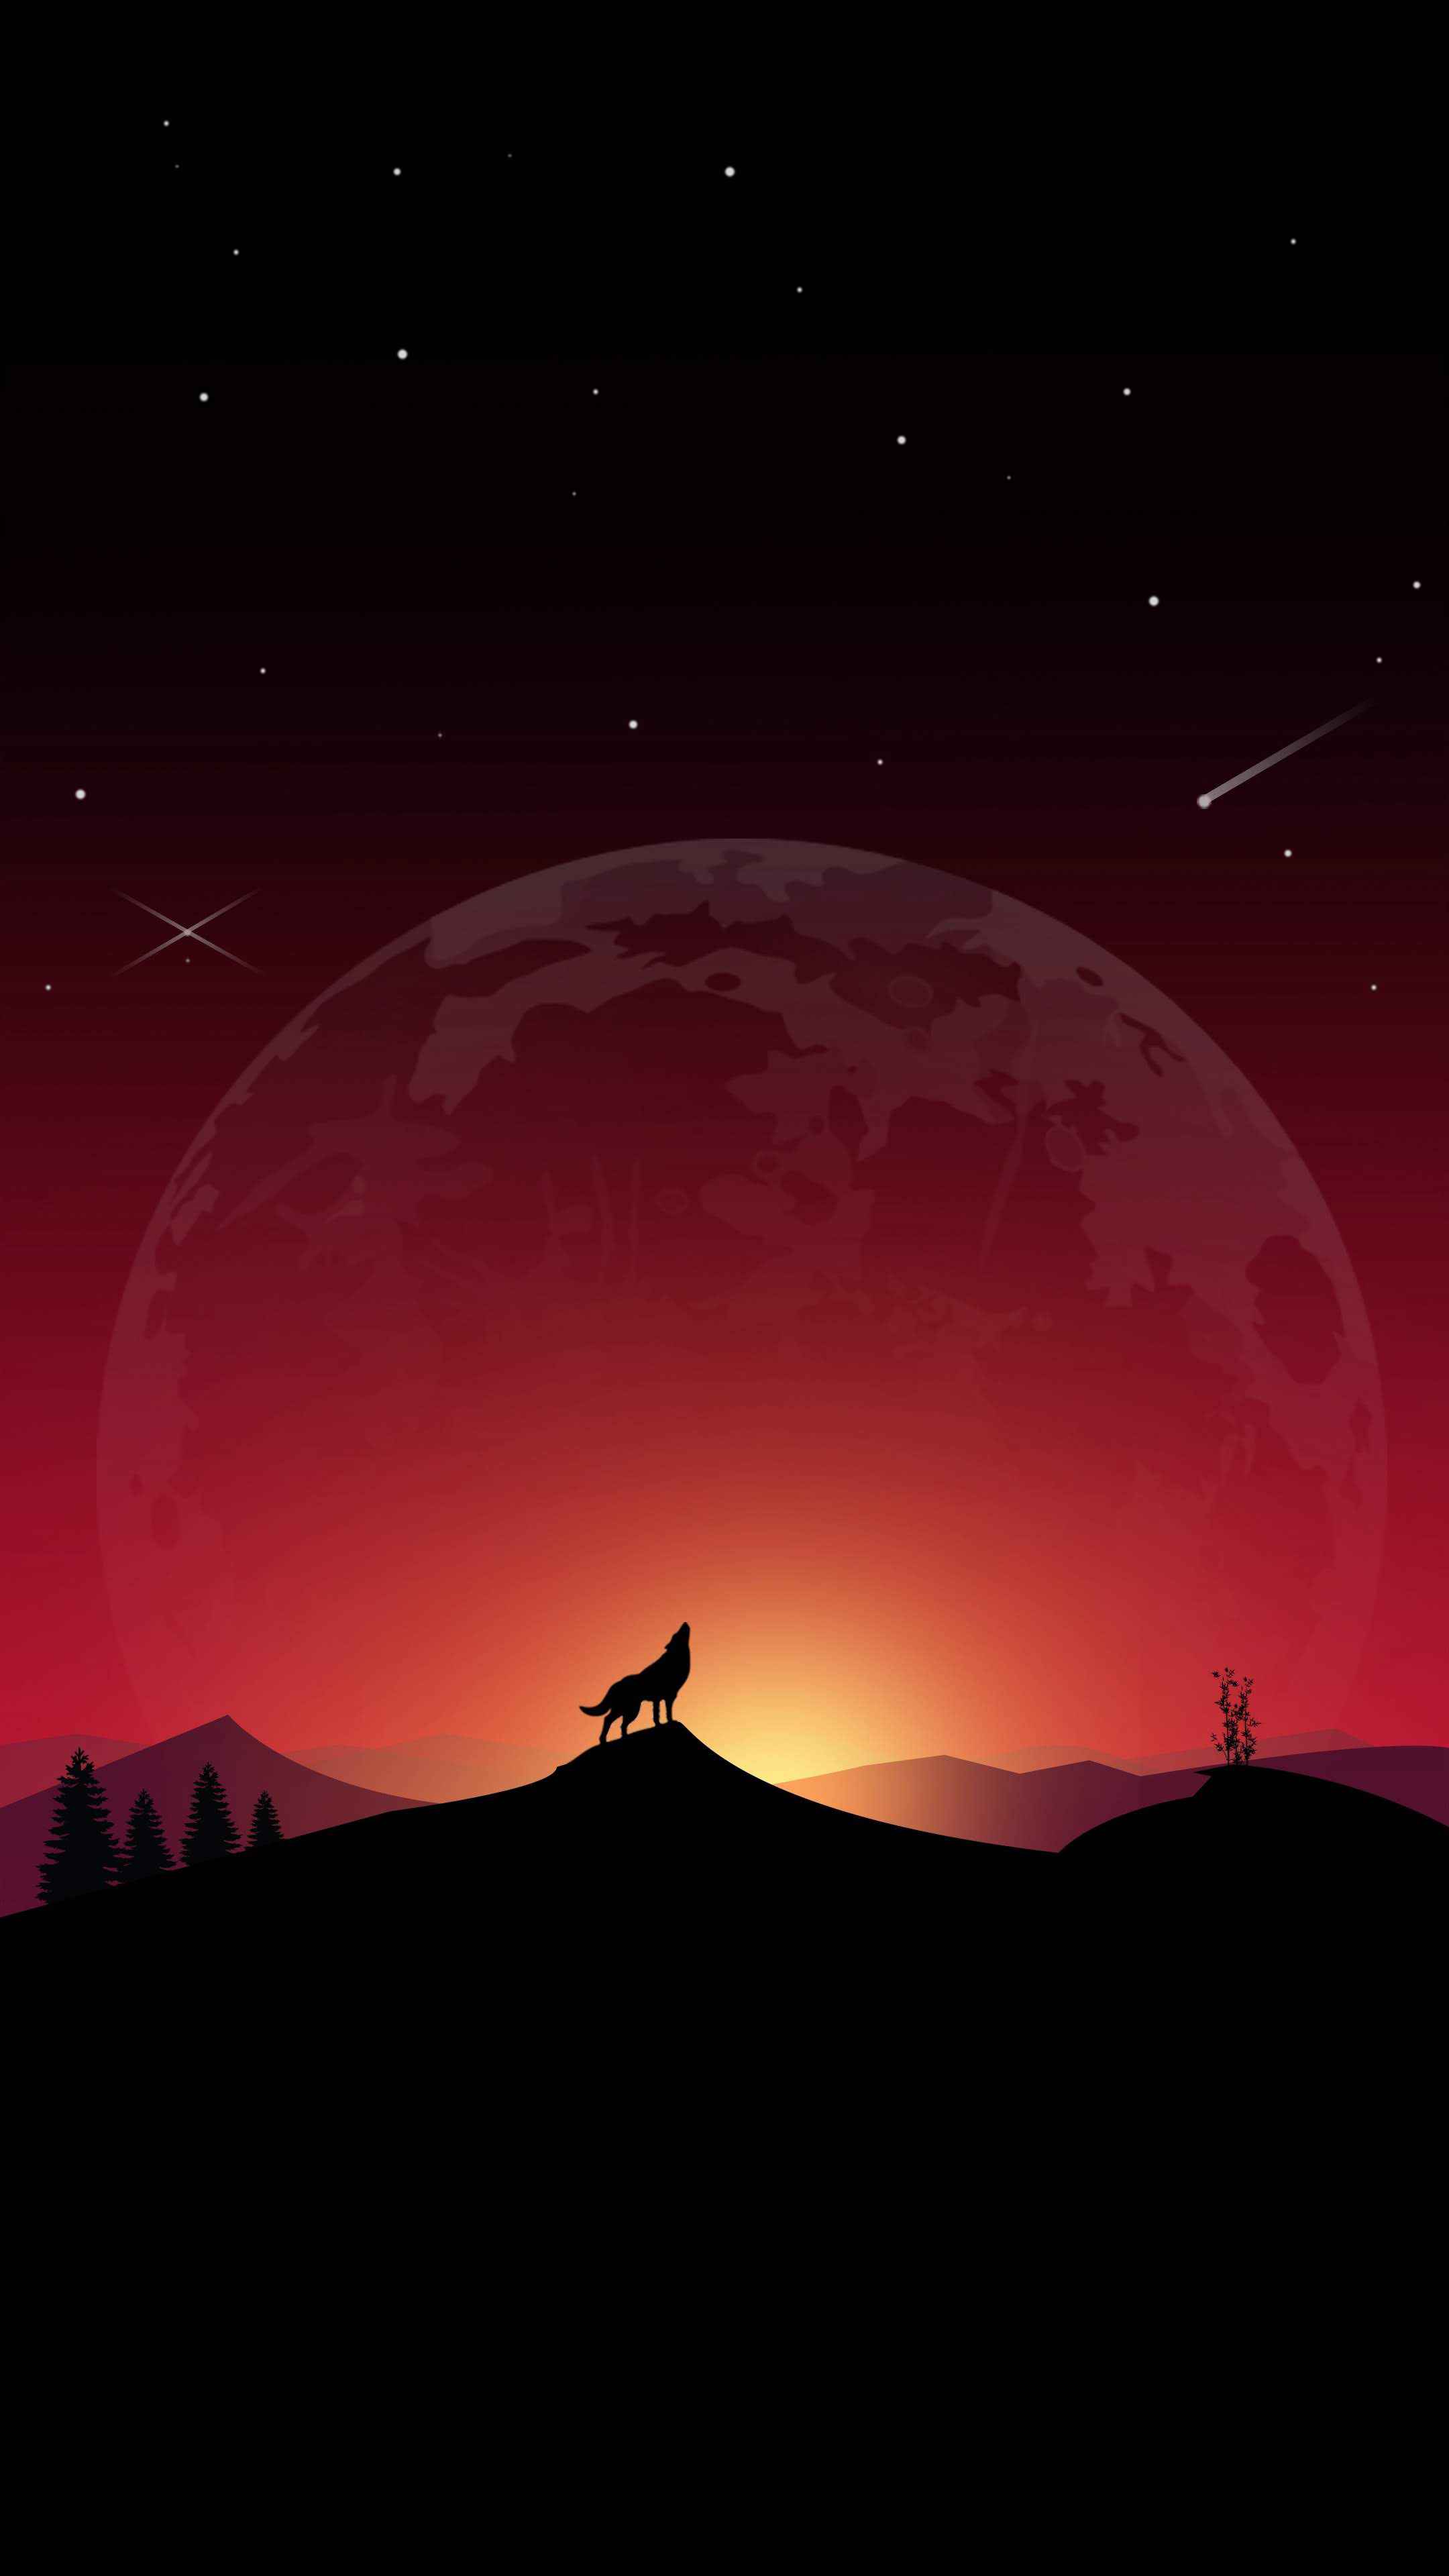 Red Moon Wolf IPhone Wallpaper - IPhone Wallpapers : iPhone Wallpapers